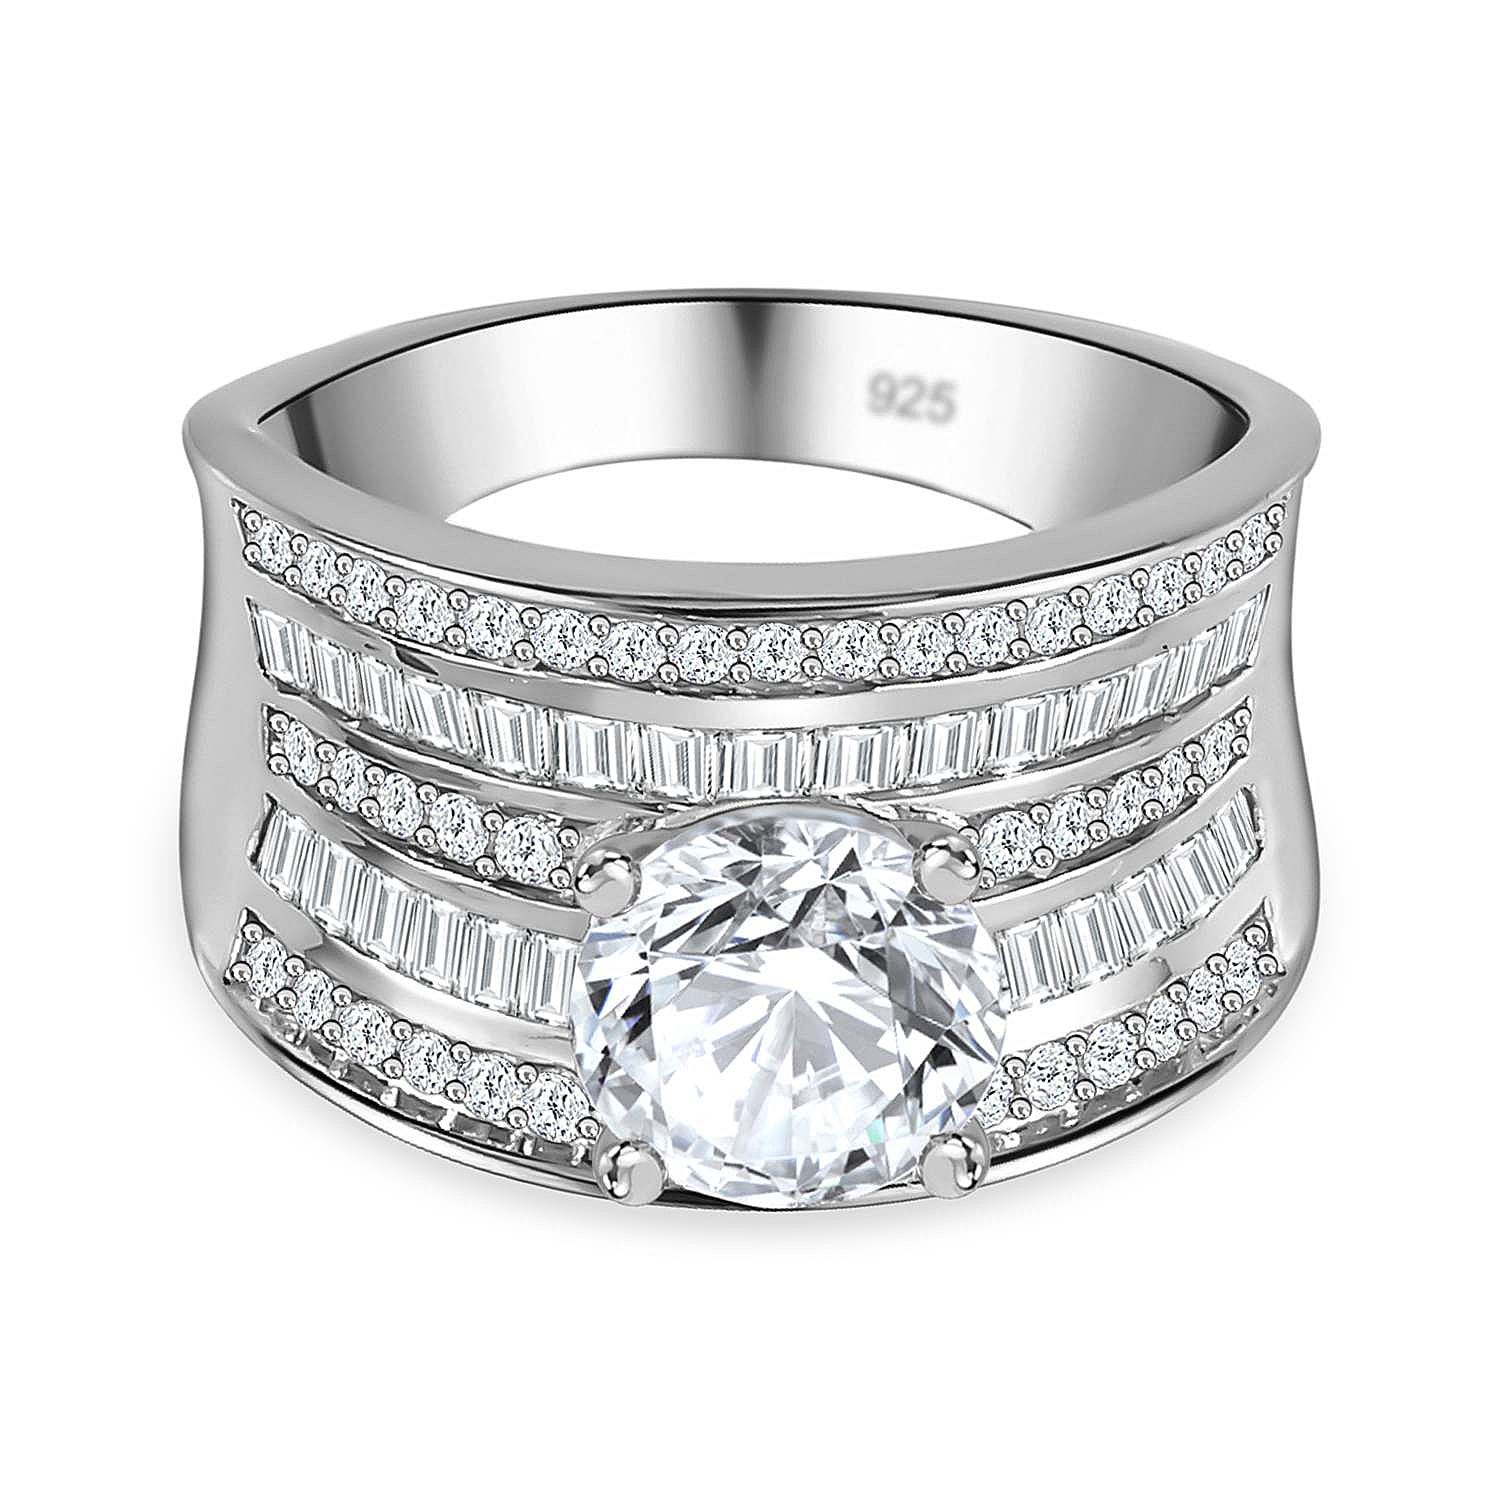 Moissanite Multi Row Scoop Ring in Rhodium Overlay Sterling Silver 3.11 Ct, Silver Wt 8.05 GM